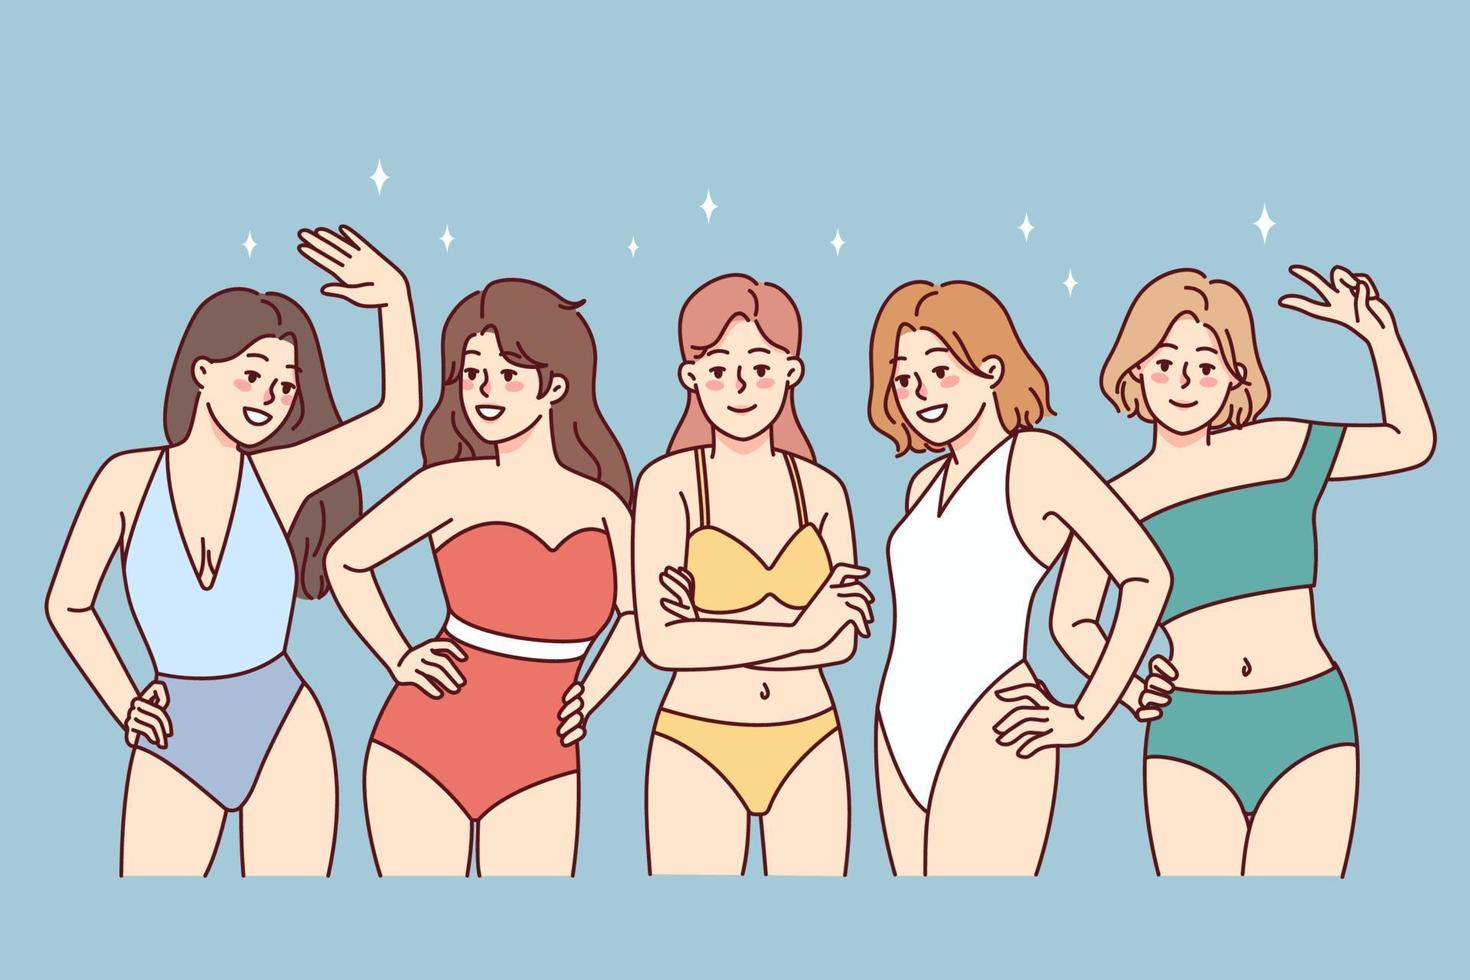 Portrait of smiling girls in swimsuits posing together. Happy diverse young women in bikini enjoy summer vacation. Diversity and body positivity. Vector illustration.